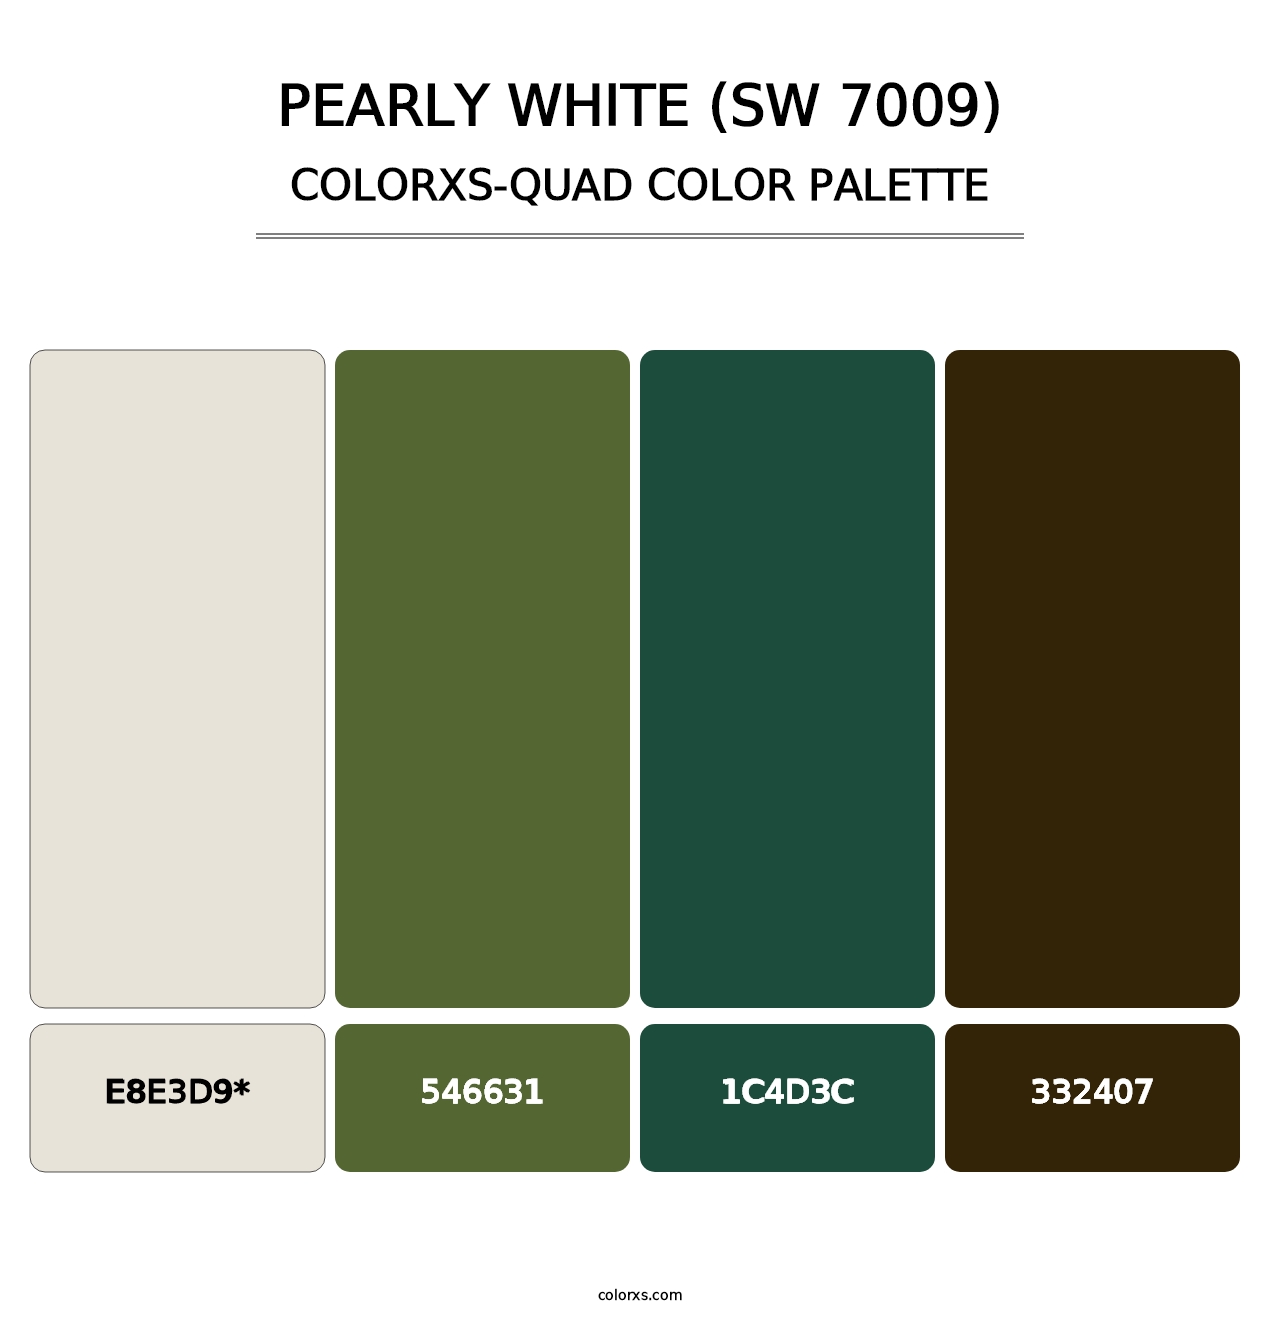 Pearly White (SW 7009) - Colorxs Quad Palette